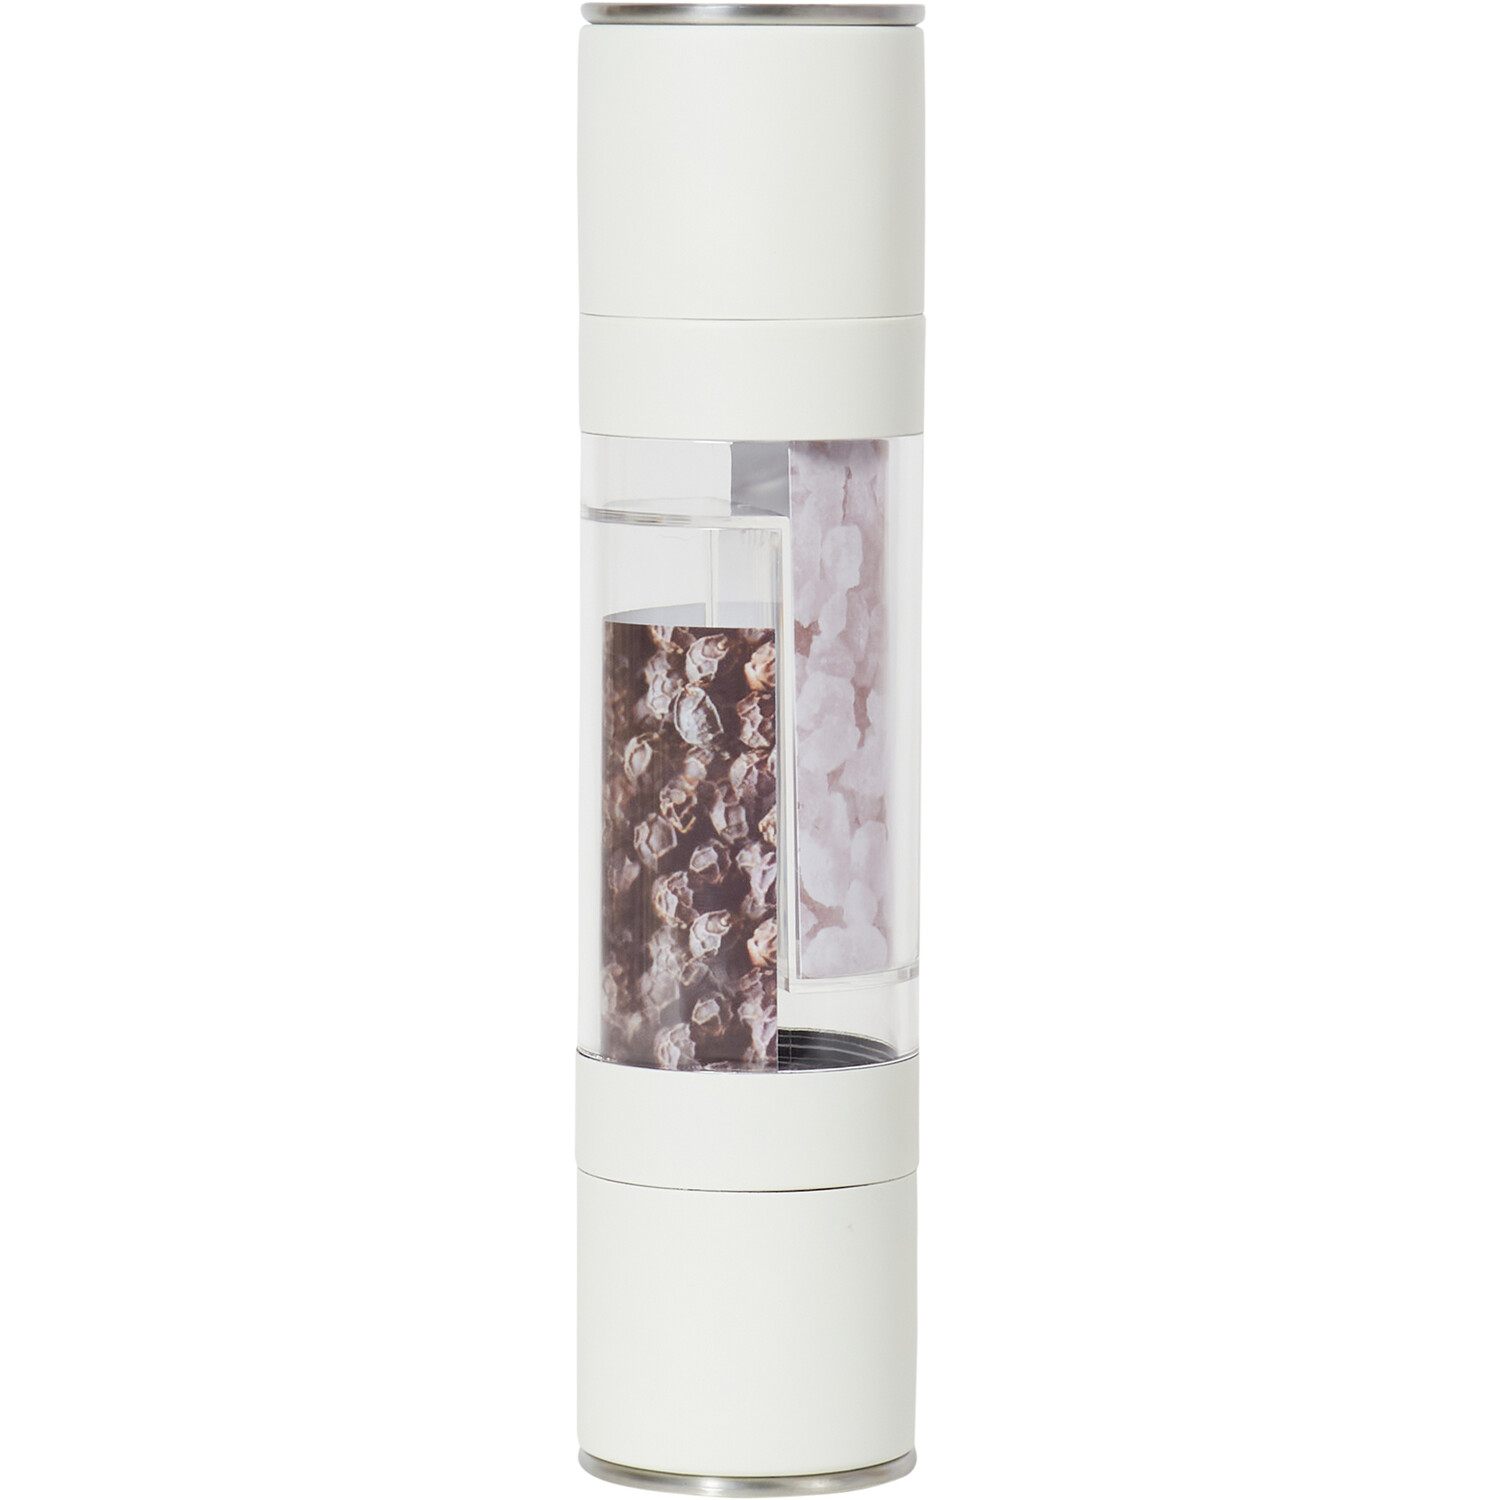 Retreat 2-in-1 Salt and Pepper Mill - Ivory Image 4